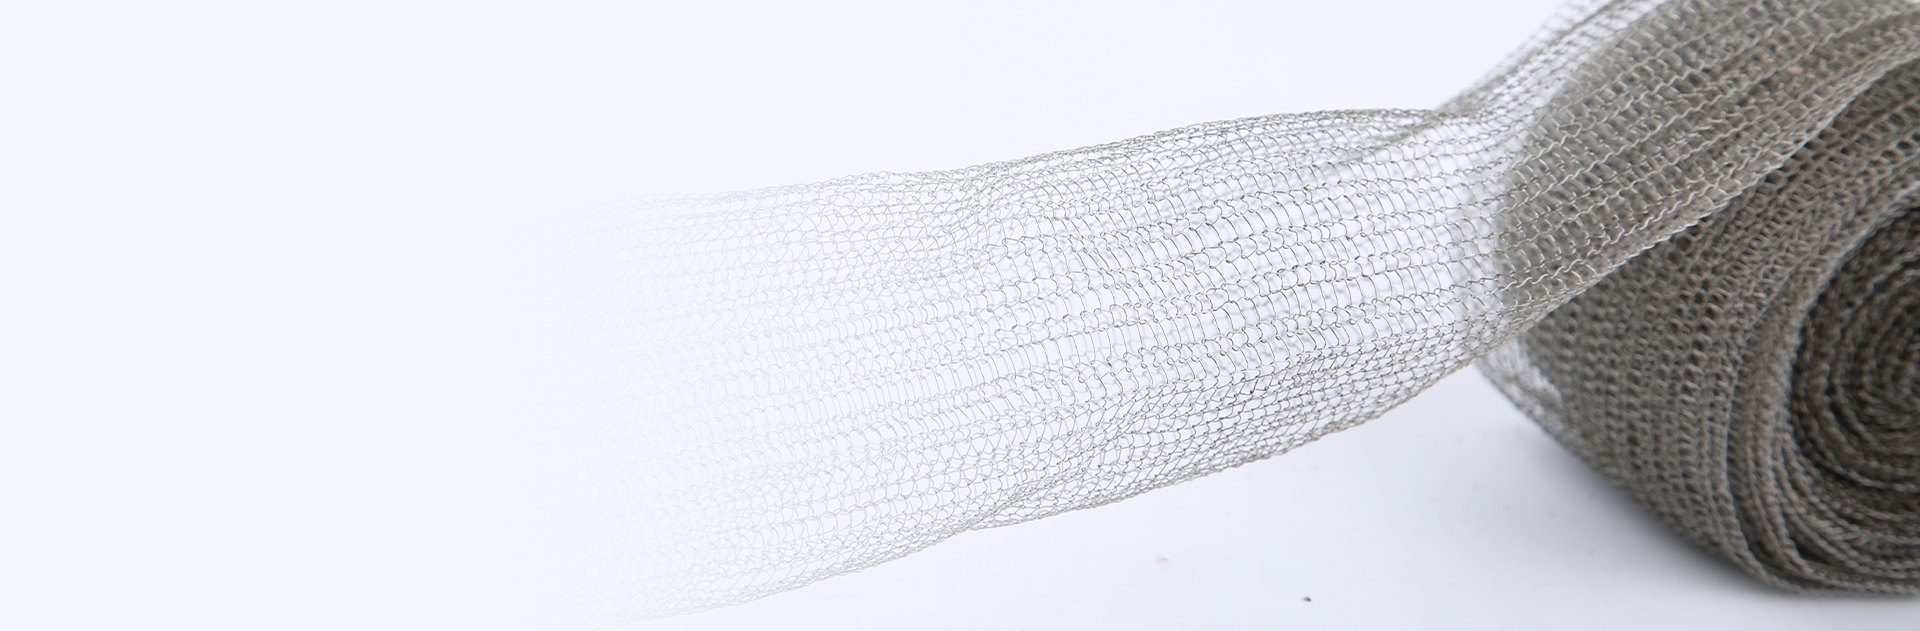 A roll of mono-filament stainless steel knitted mesh with a part stretching out.